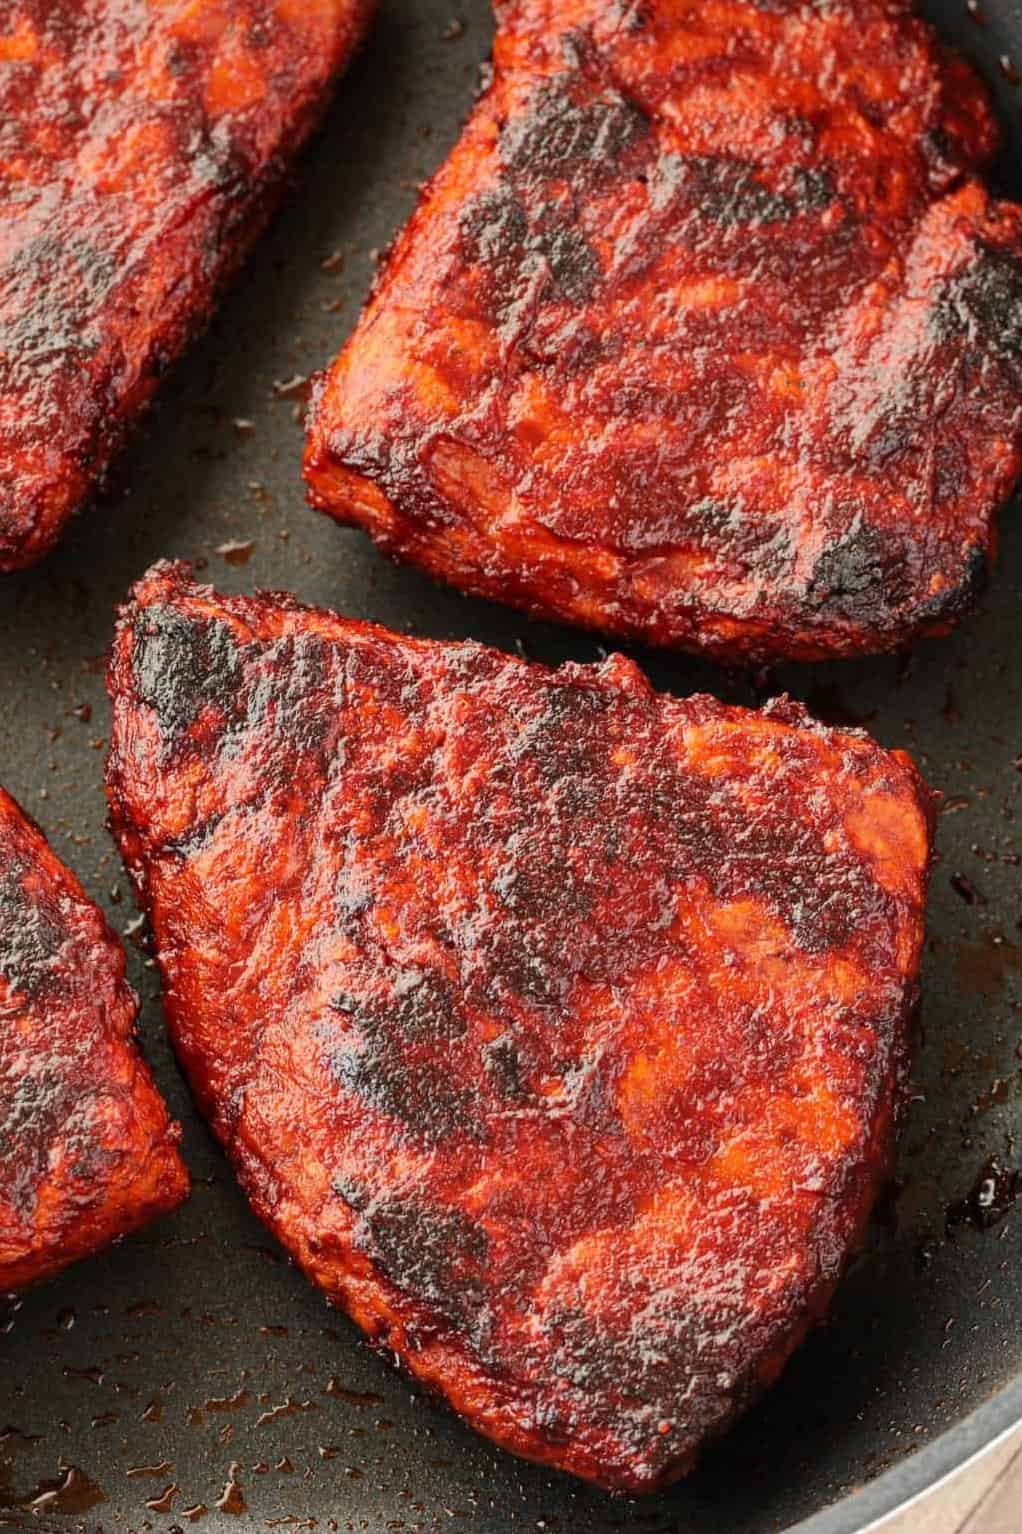  Perfectly seared and seasoned veggie steak, coming right up!